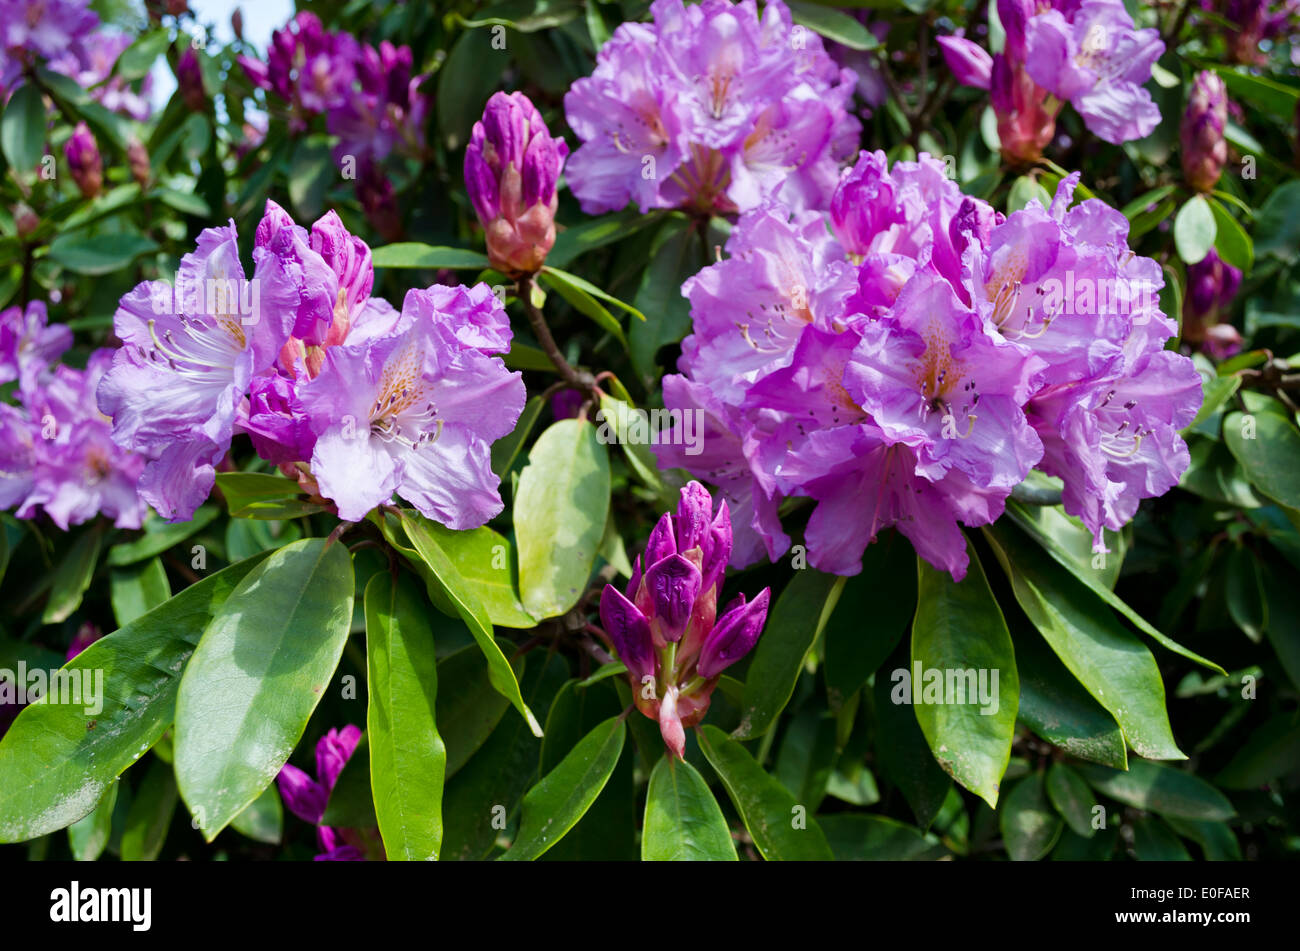 Purple rhododendron flowers in full and partial bloom.  At Meerkerk gardens on Whidbey Island in Washington State, U.S.A. Stock Photo